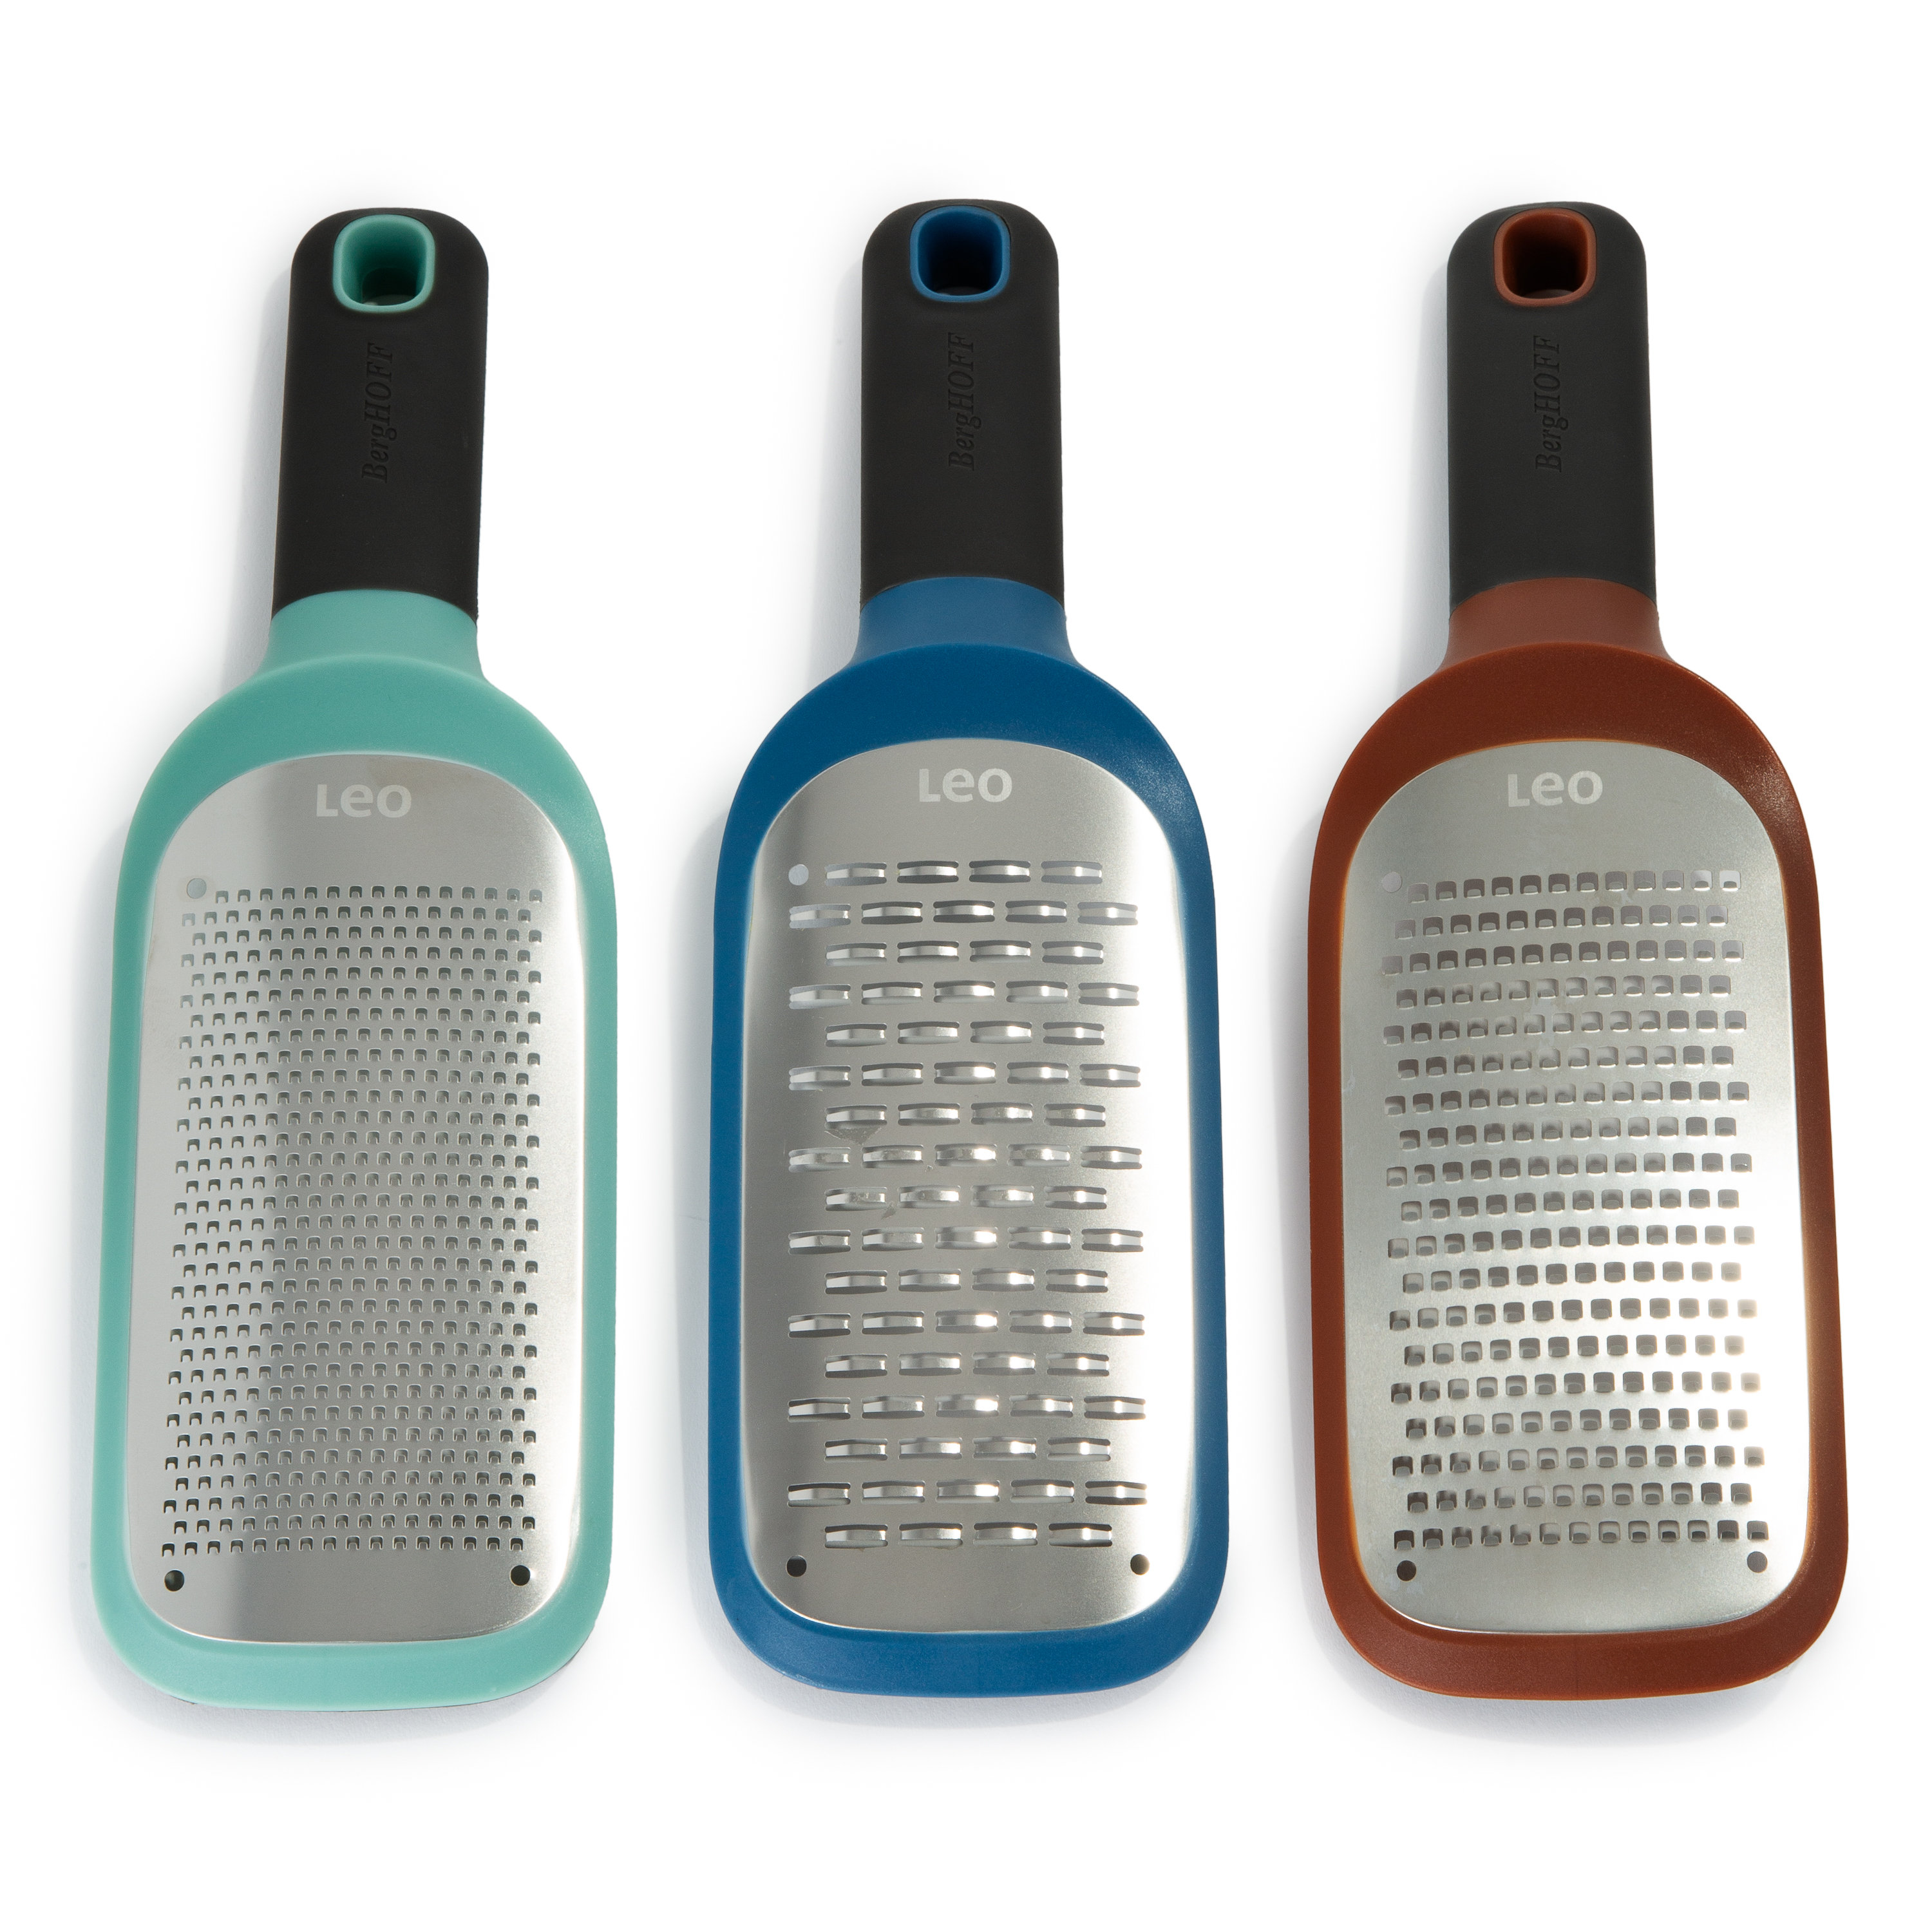 Multifunctional paddle grater